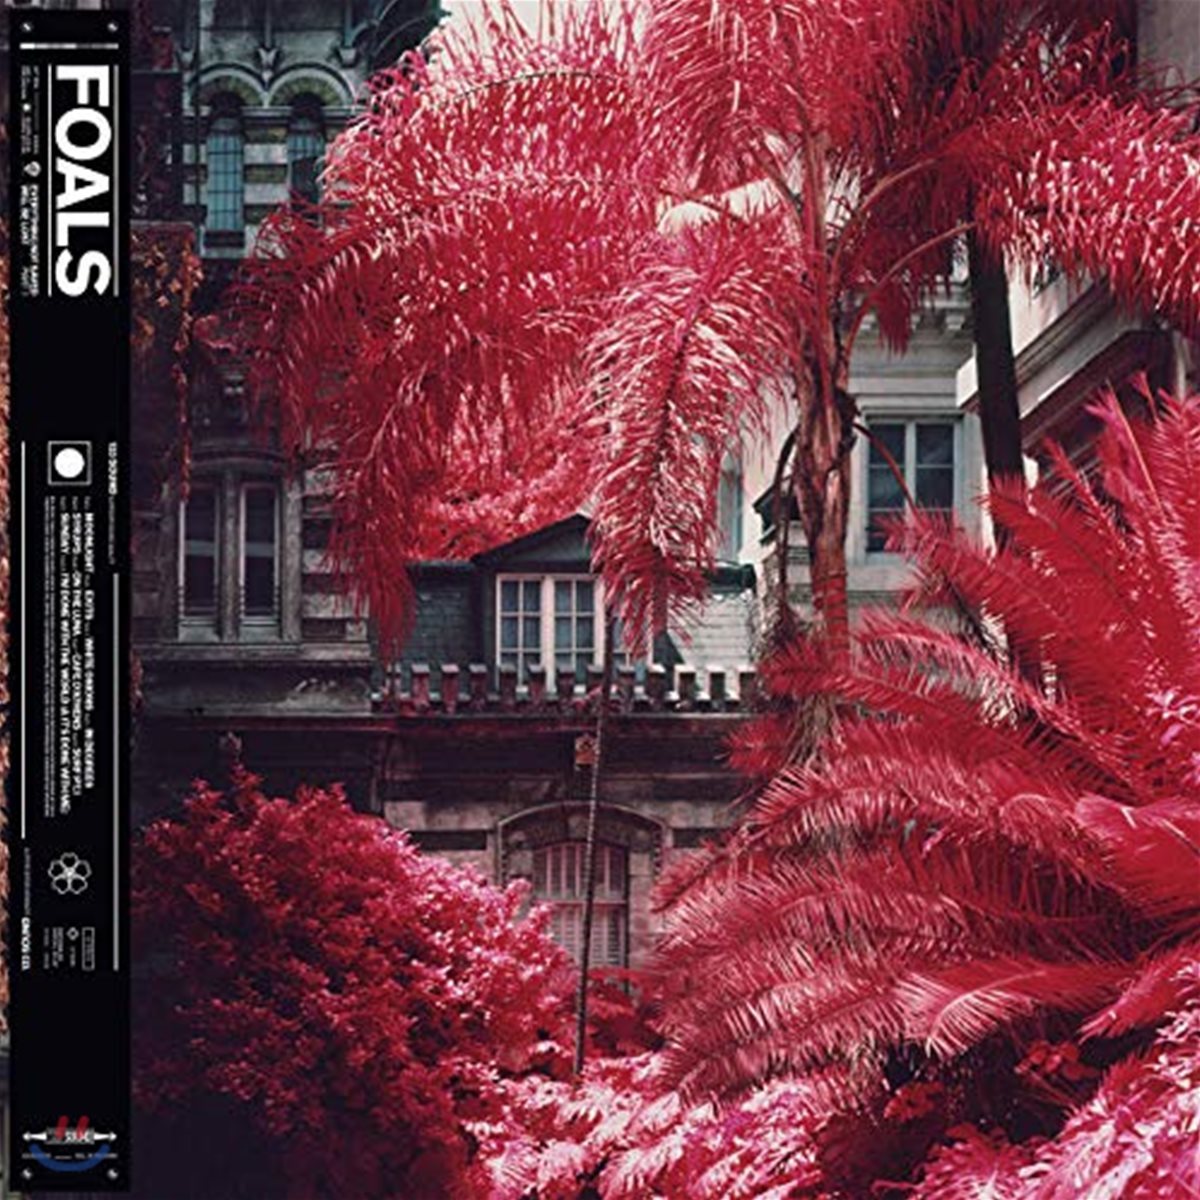 Foals - Everything Not Saved Will Be Lost Part 1 폴스 5집